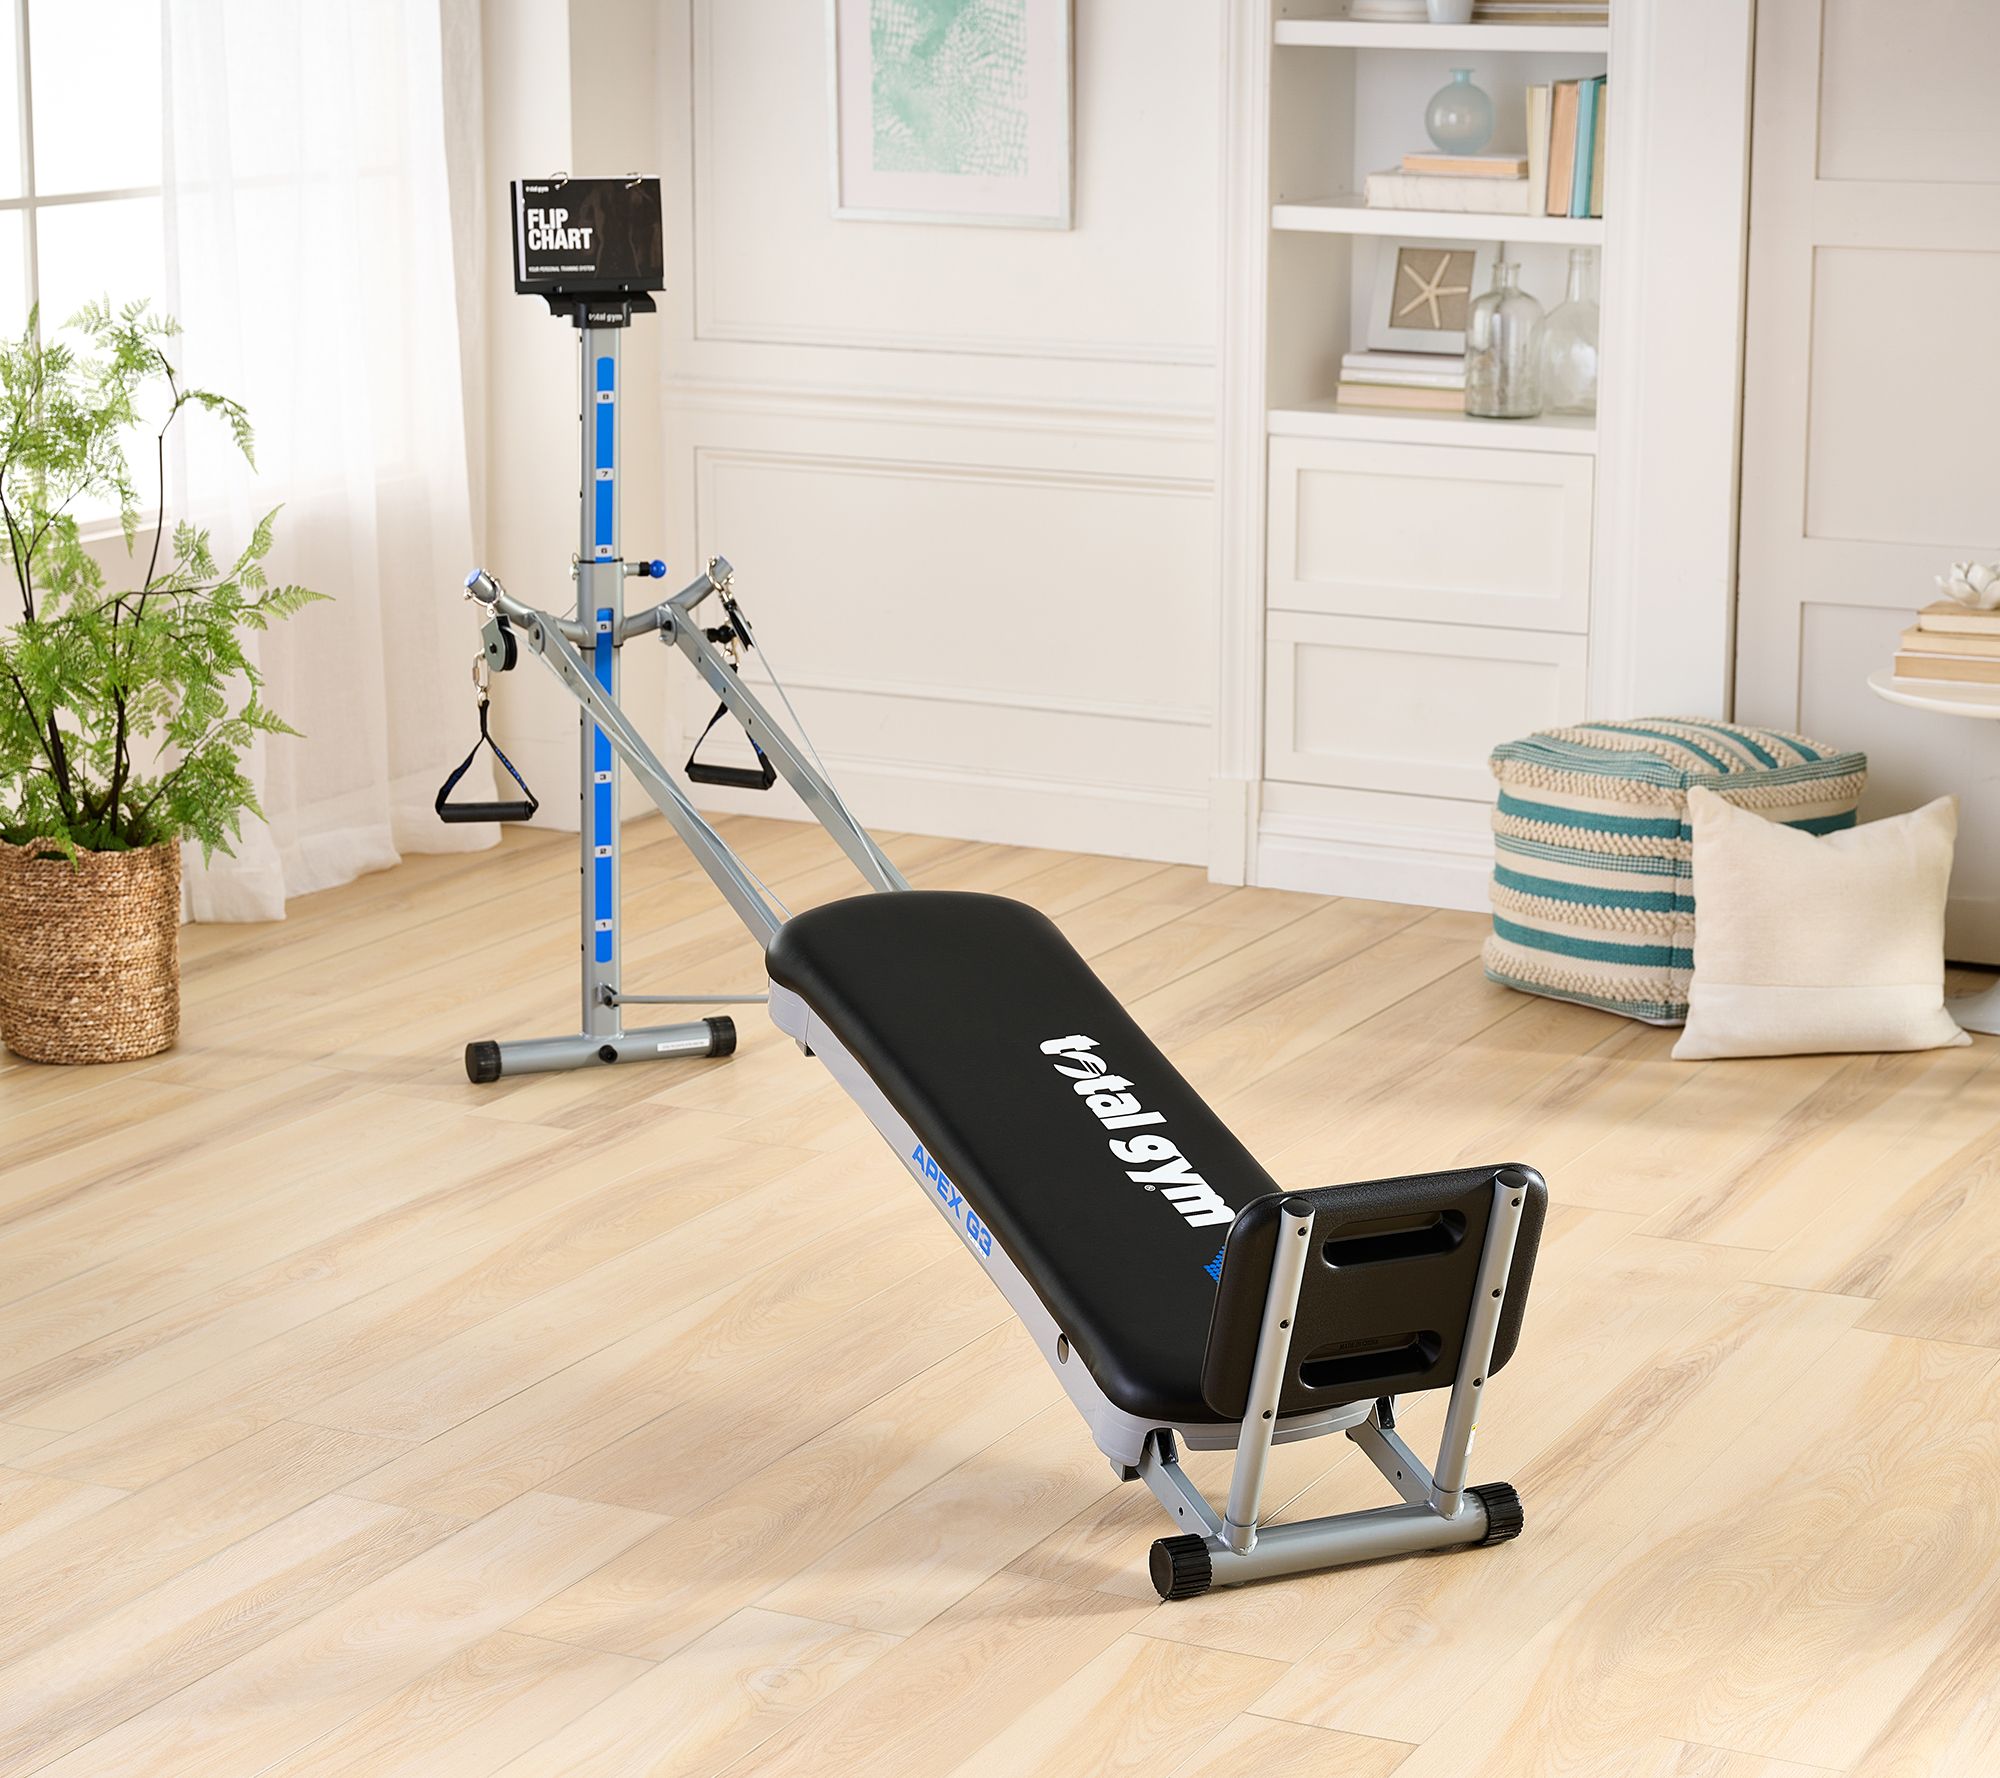 Side Shaper Pro Total Body Workout and Sculpting Machine